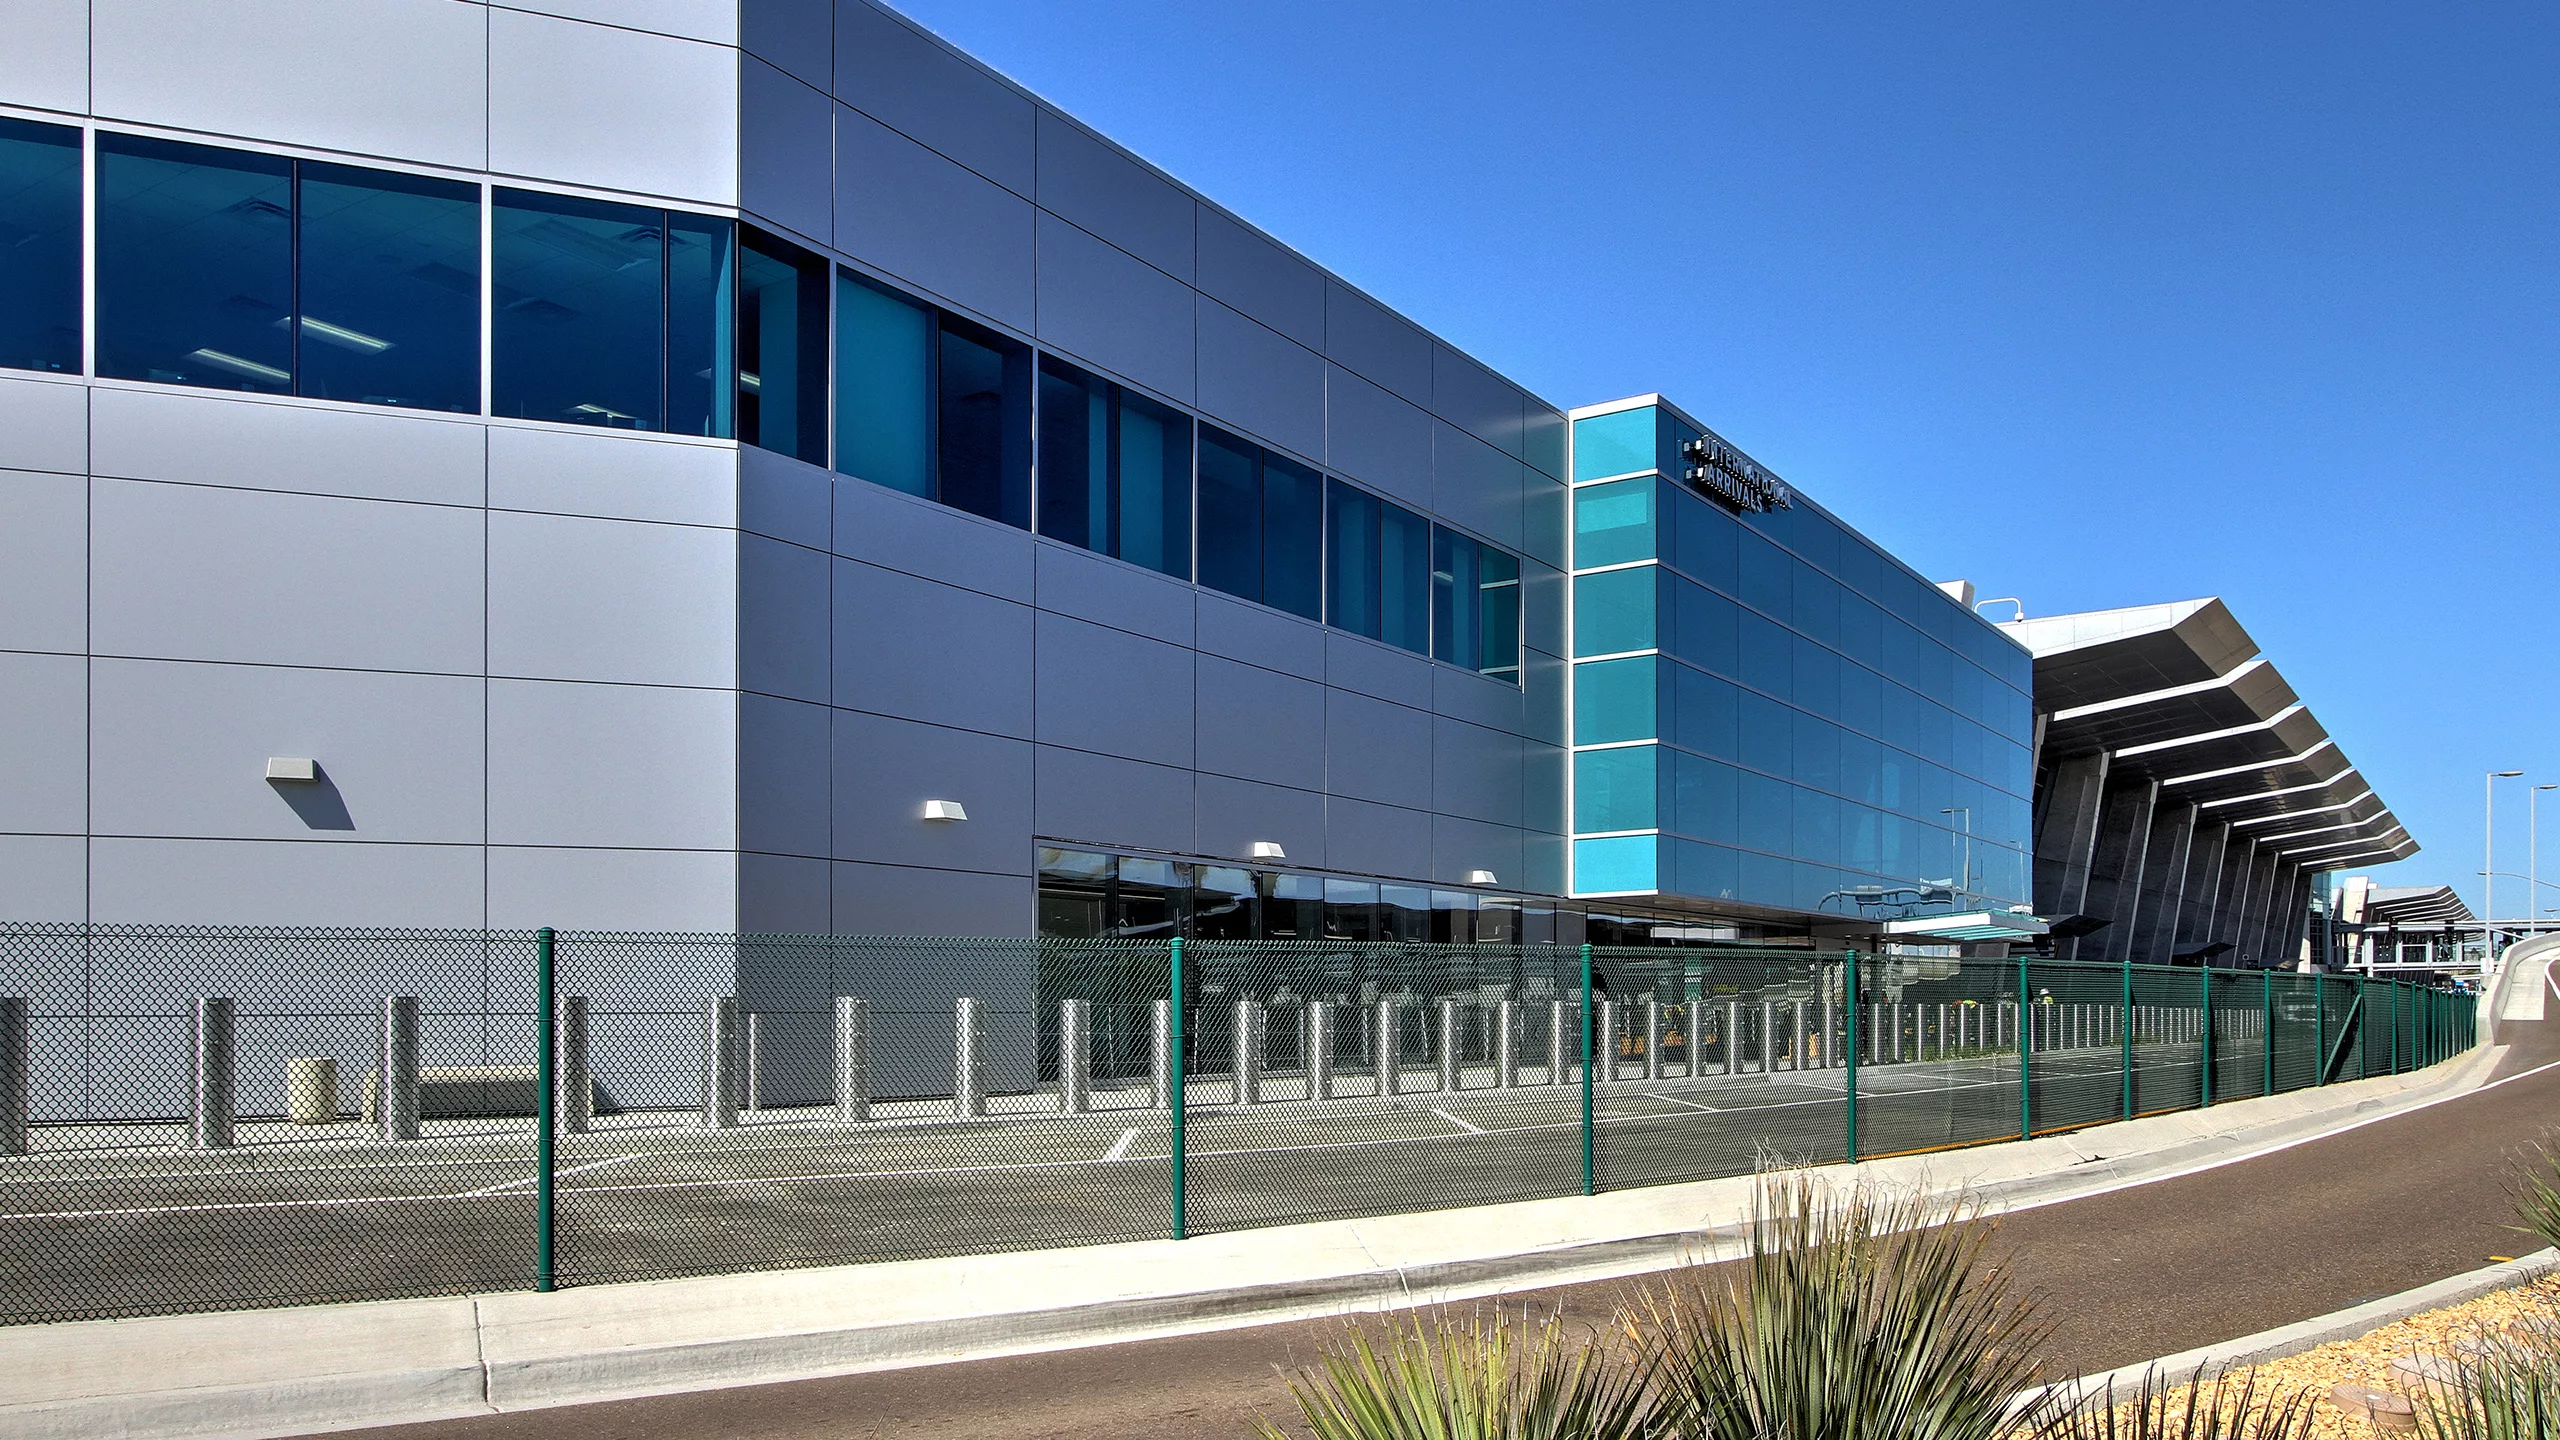 Exterior daylight view looking east toward San Diego International Airport's multi-story, glass-and-steel Federal Inspection Station fronted by steel safety bollards and minimal landscaping